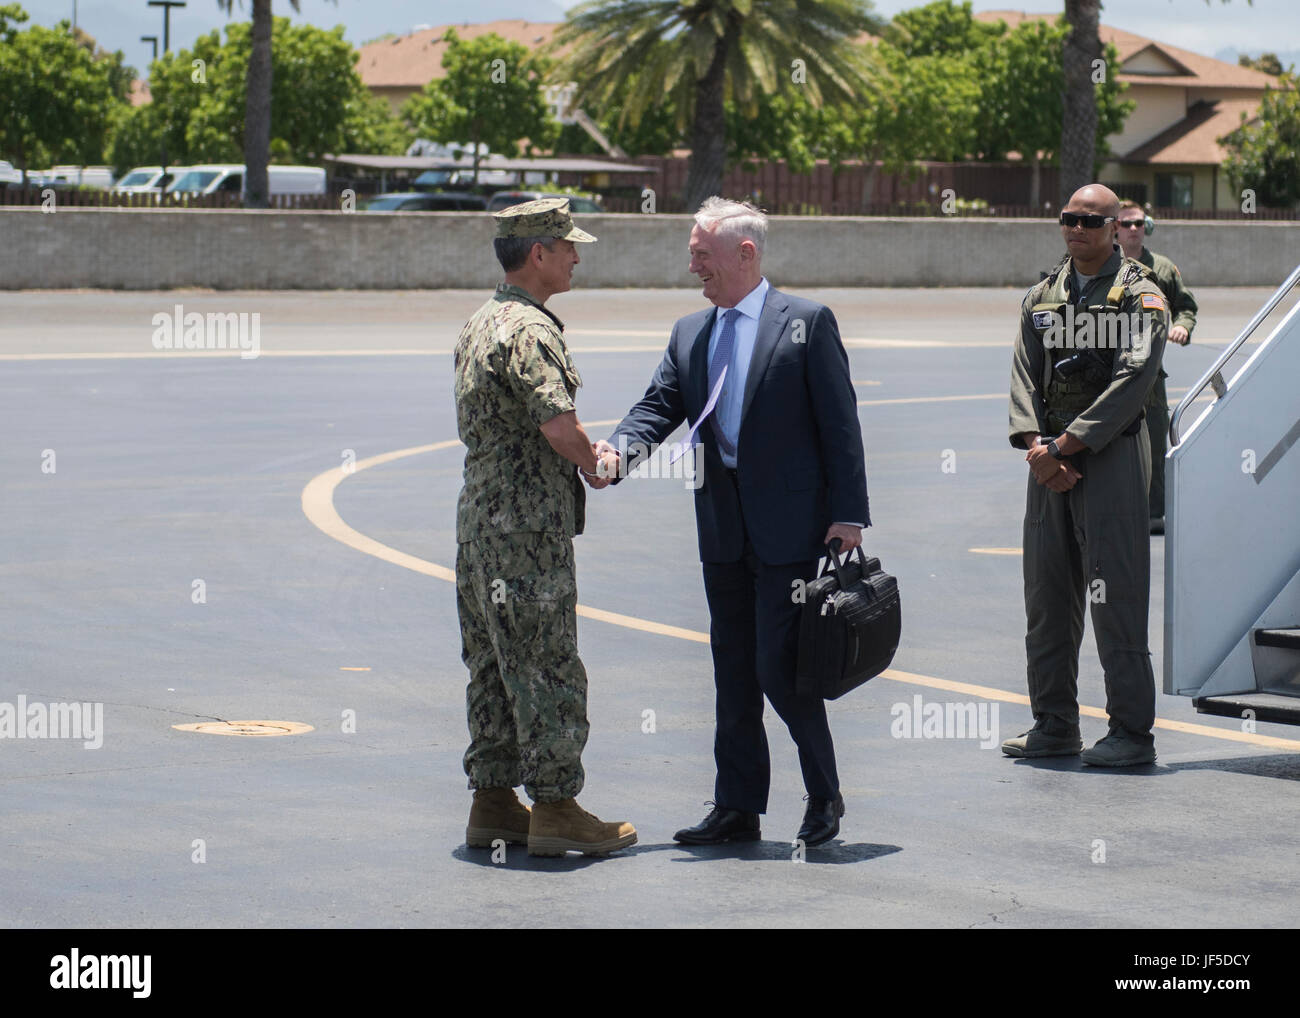 170531-N-ON707-244JOINT BASE PEARL HARBOR-HICKAM, Hawaii (May 31, 2017)— Adm. Harry Harris, Commander of U.S. Pacific Command (PACOM), greets Secretary of Defense James Mattis upon his arrival at Hickam Airfield. This is the first time Mattis has visited PACOM since holding the office of Secretary of Defense. (U.S. Navy photo by Mass Communication 2nd Class James Mullen/Released) Stock Photo